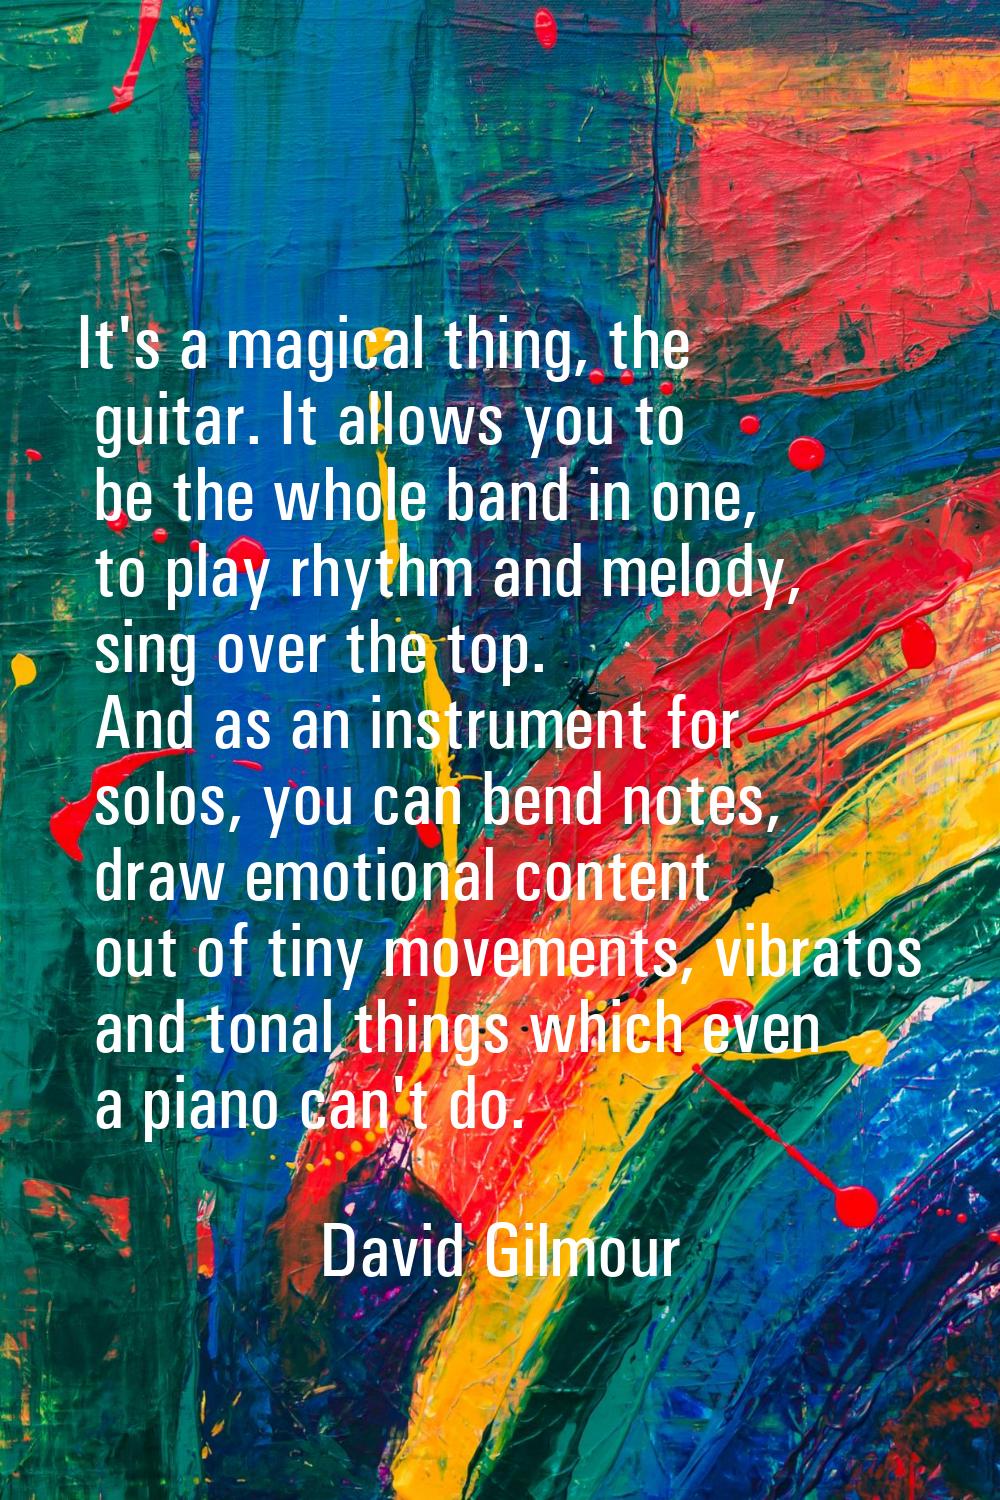 It's a magical thing, the guitar. It allows you to be the whole band in one, to play rhythm and mel